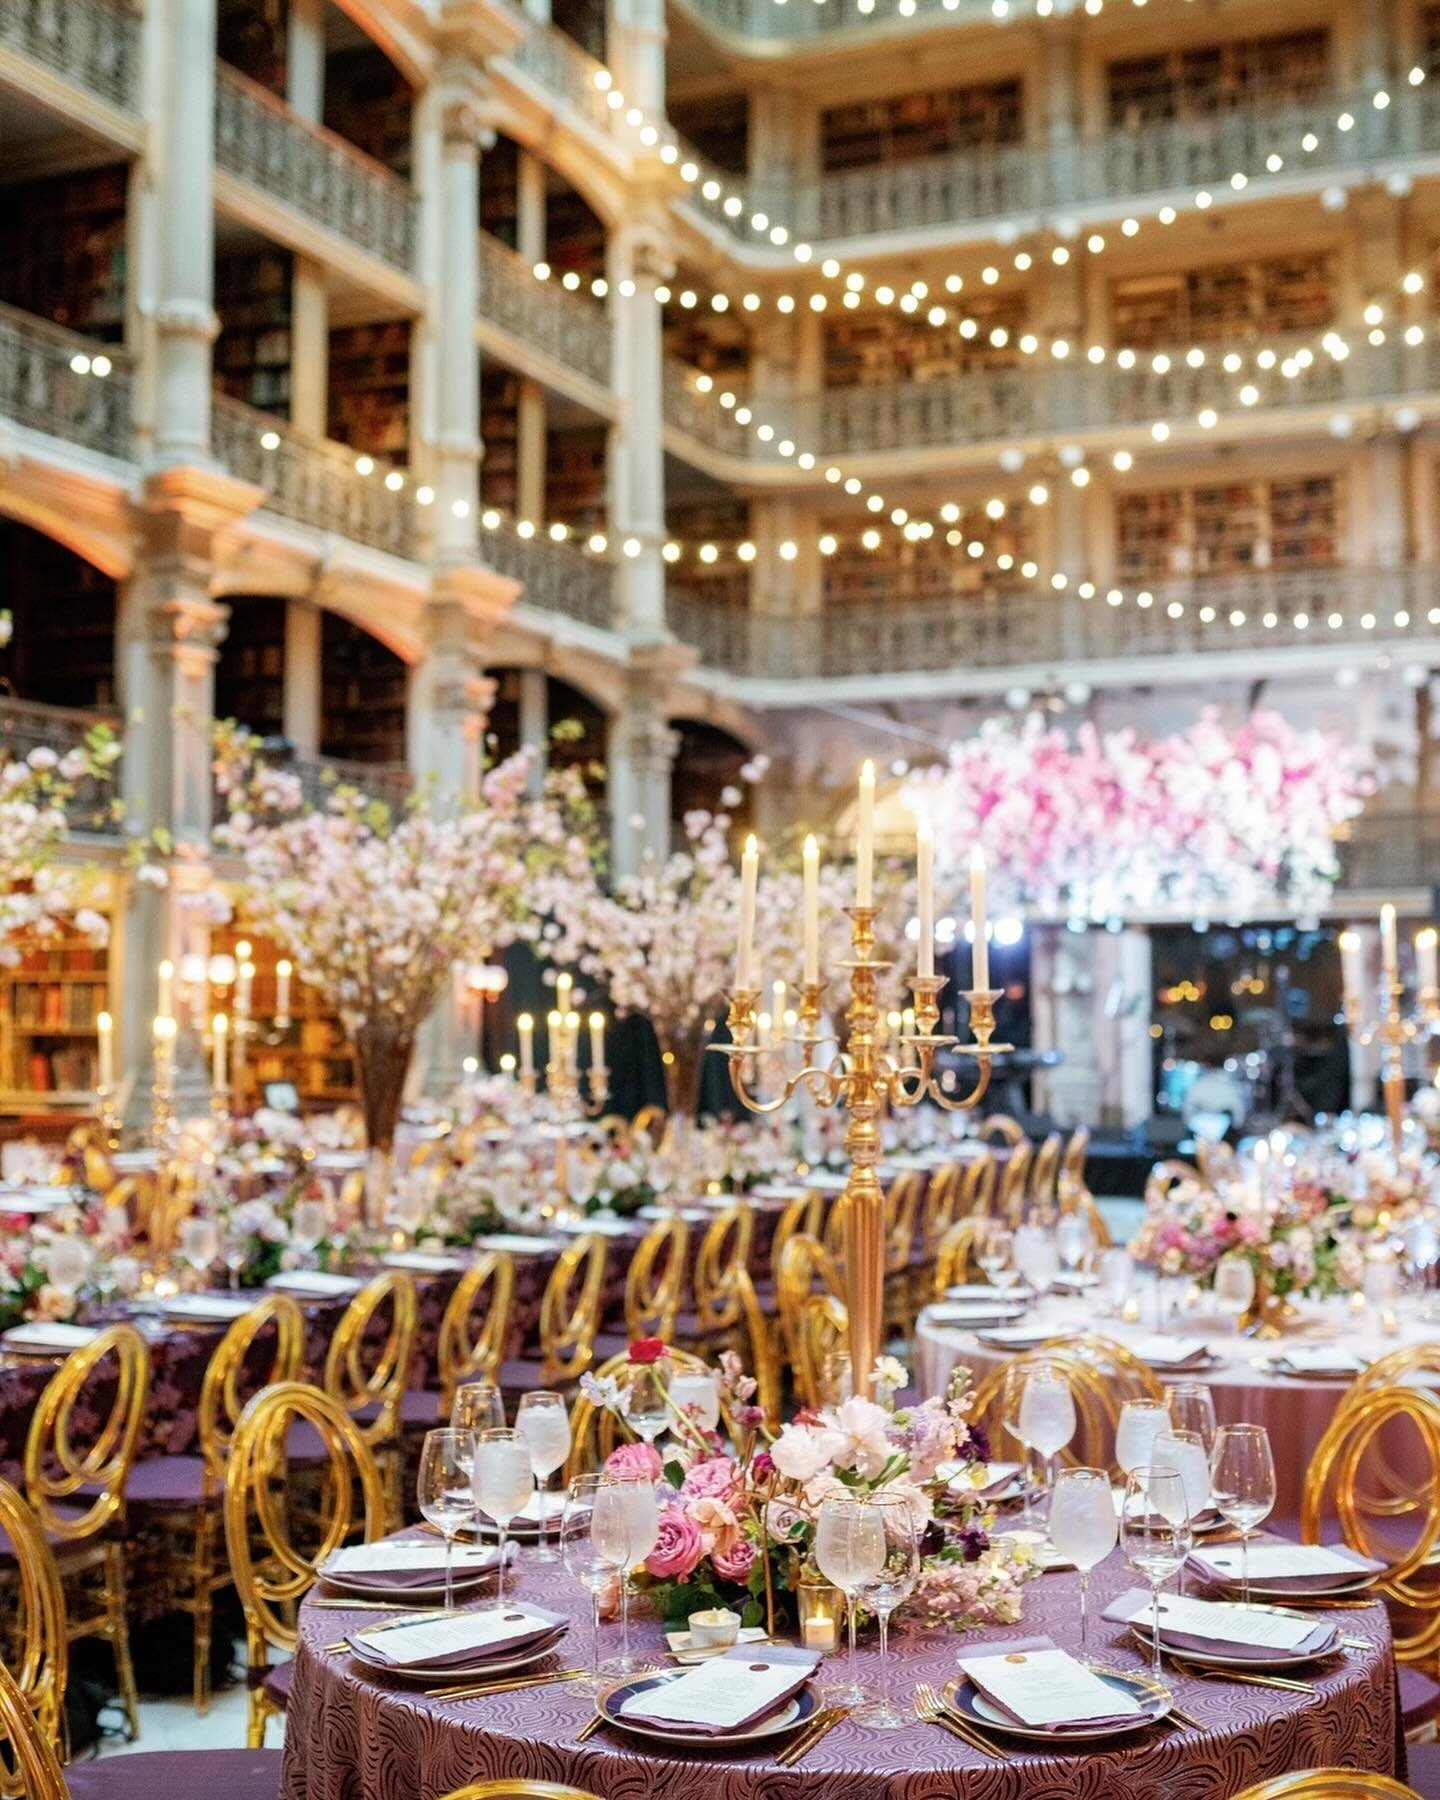 When your venue is as grand and awe-inspiring as this one, let&rsquo;s design your wedding to match! R+N&rsquo;s wedding was luxurious from start to finish with a wow-factor focal point everywhere guests looked.
⠀⠀⠀⠀⠀⠀⠀⠀⠀
Photos: @annaandmateo @smitt